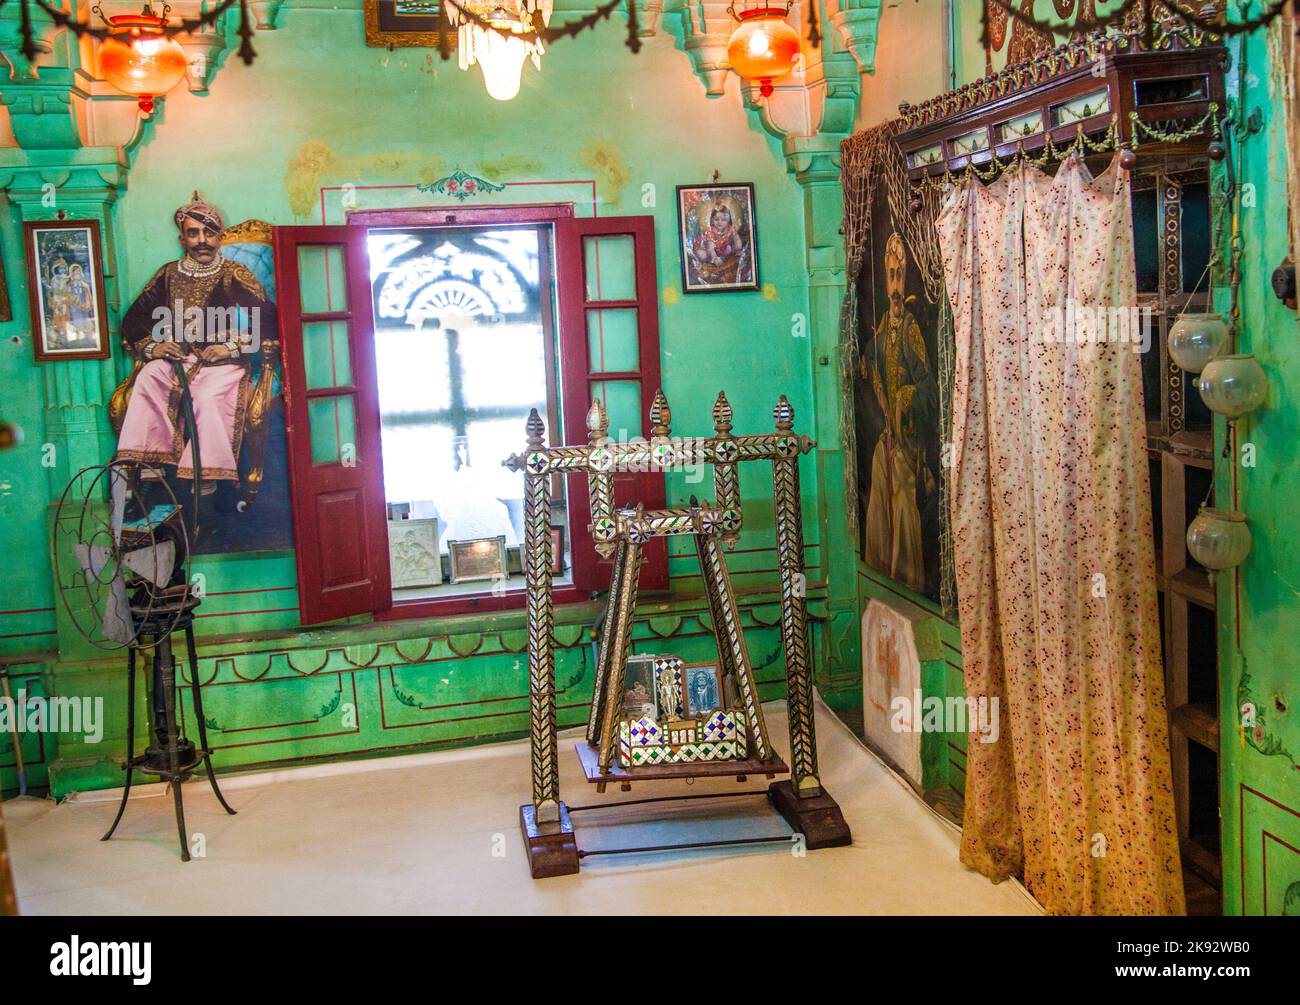 UDAIPUR, INDIA - OCT 21, 2012: inside the City Palace in Udaipur, India. The foundation of the fort was laid in 1559  by Udai Singh. Stock Photo